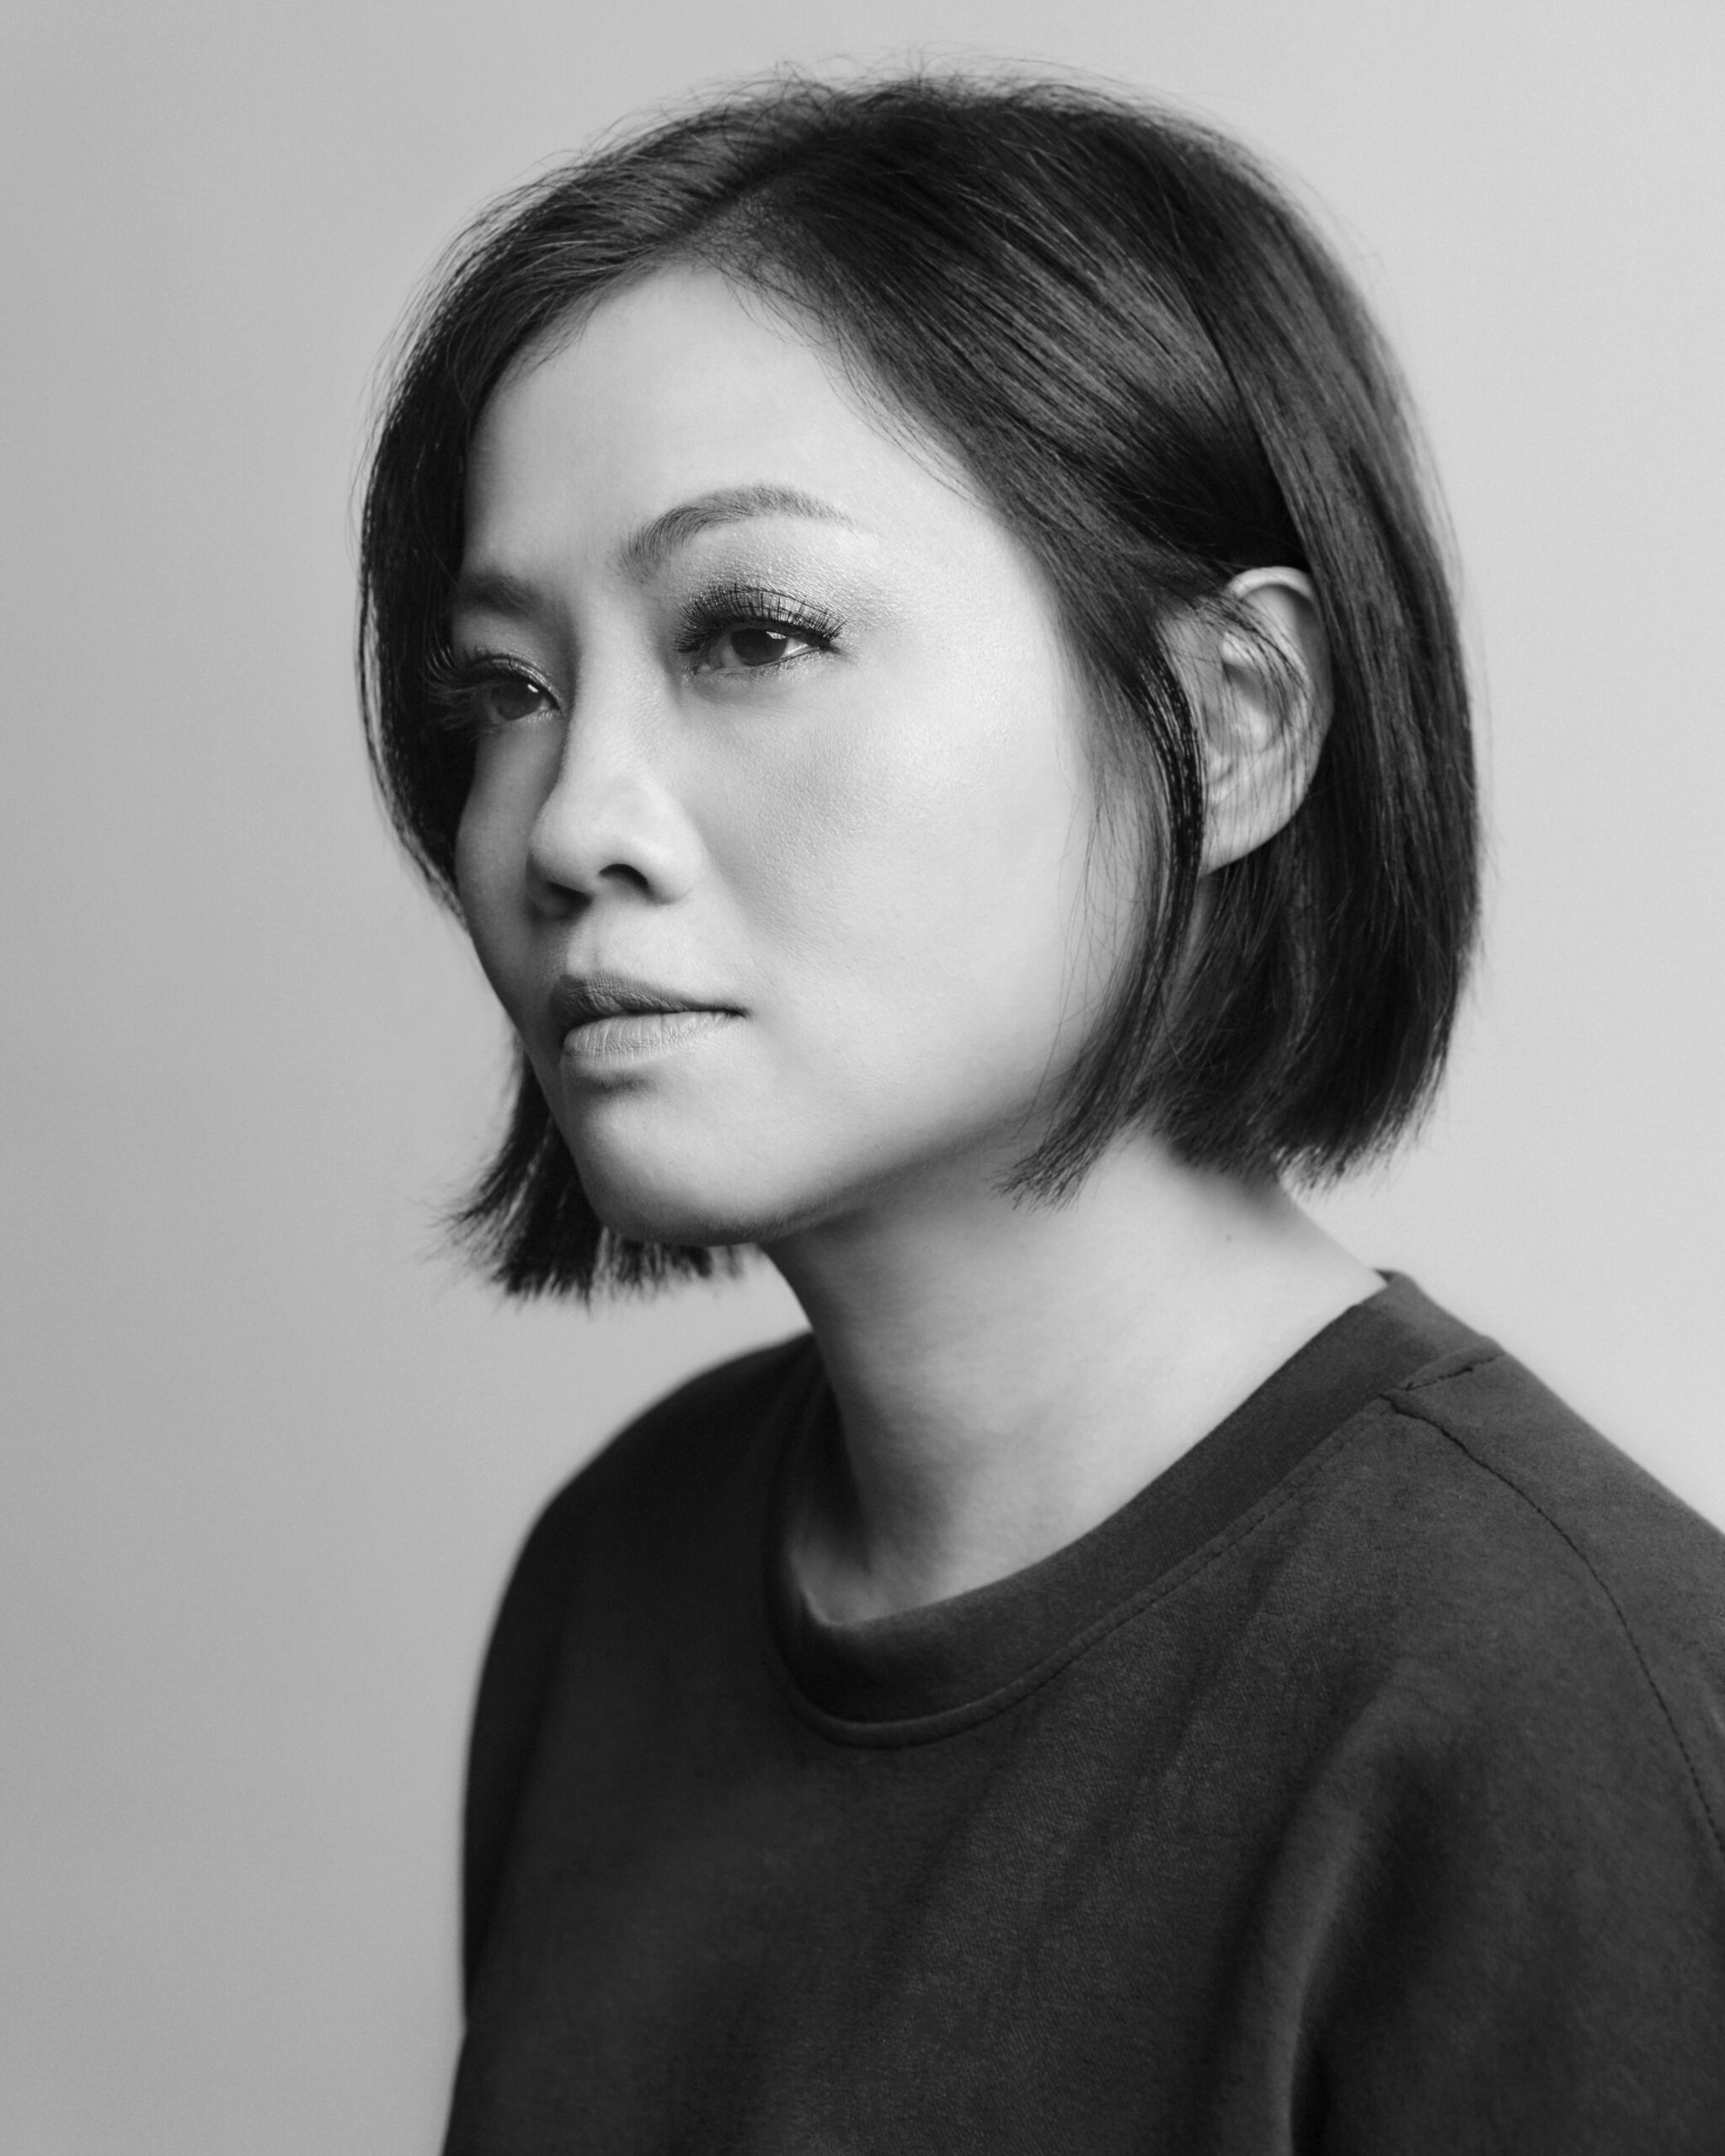 Magazine Sixty Interview with Ocean Lam